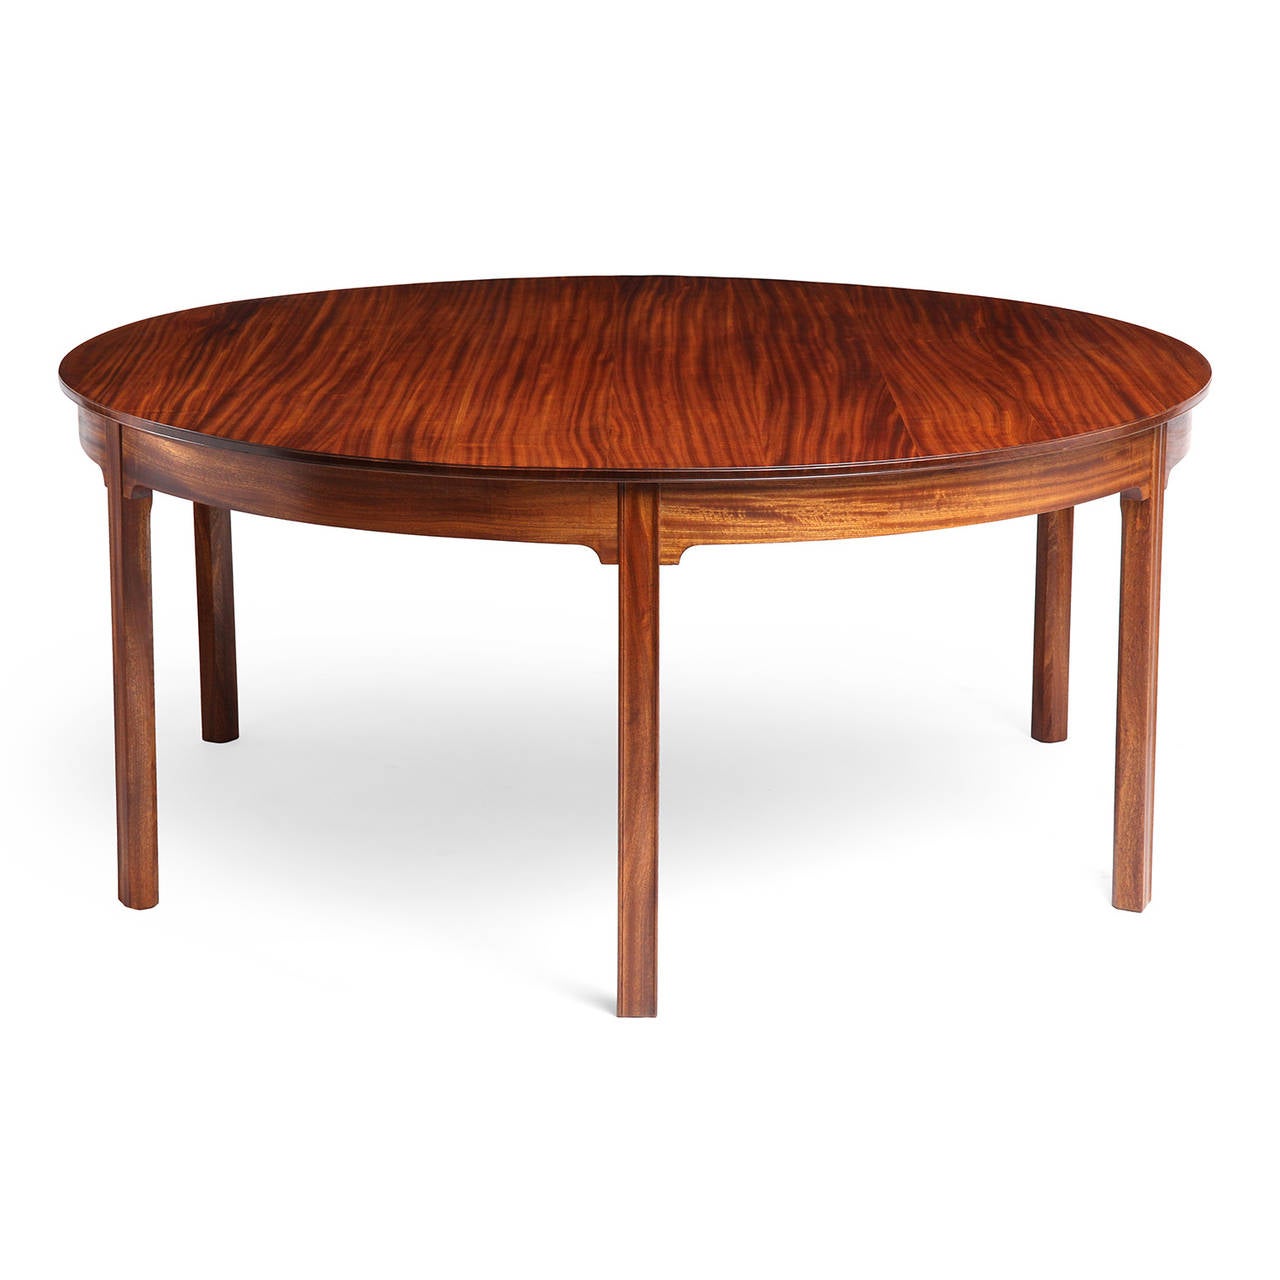 A rare, stately and superb dining table of fine proportion and refined and subtle neoclassical detailing. handcrafted of beautifully figured Honduran mahogany, the circular top has restrained arched aprons and floats upon six carved squared legs.